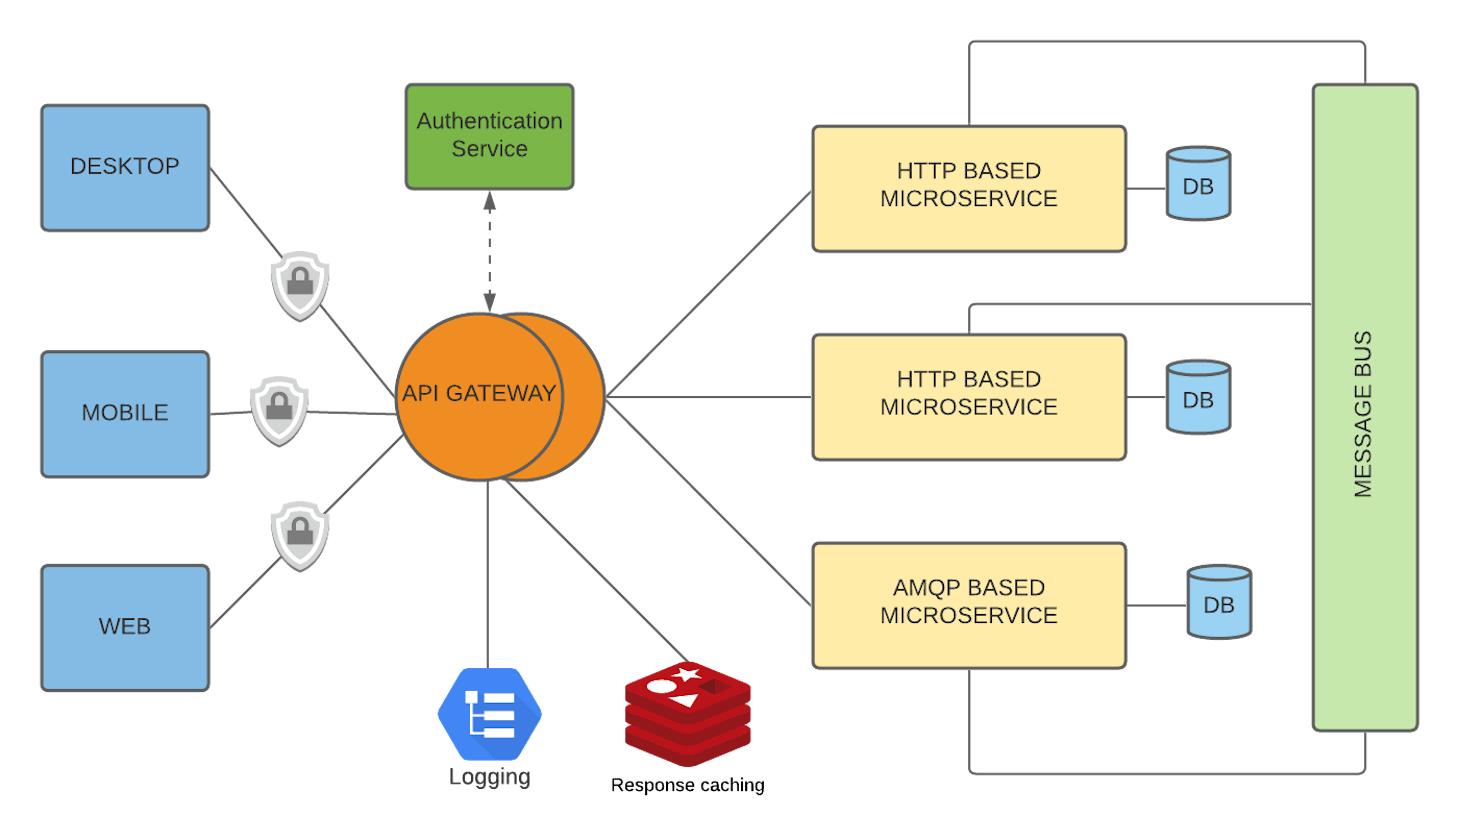 The concept behind API Gateway